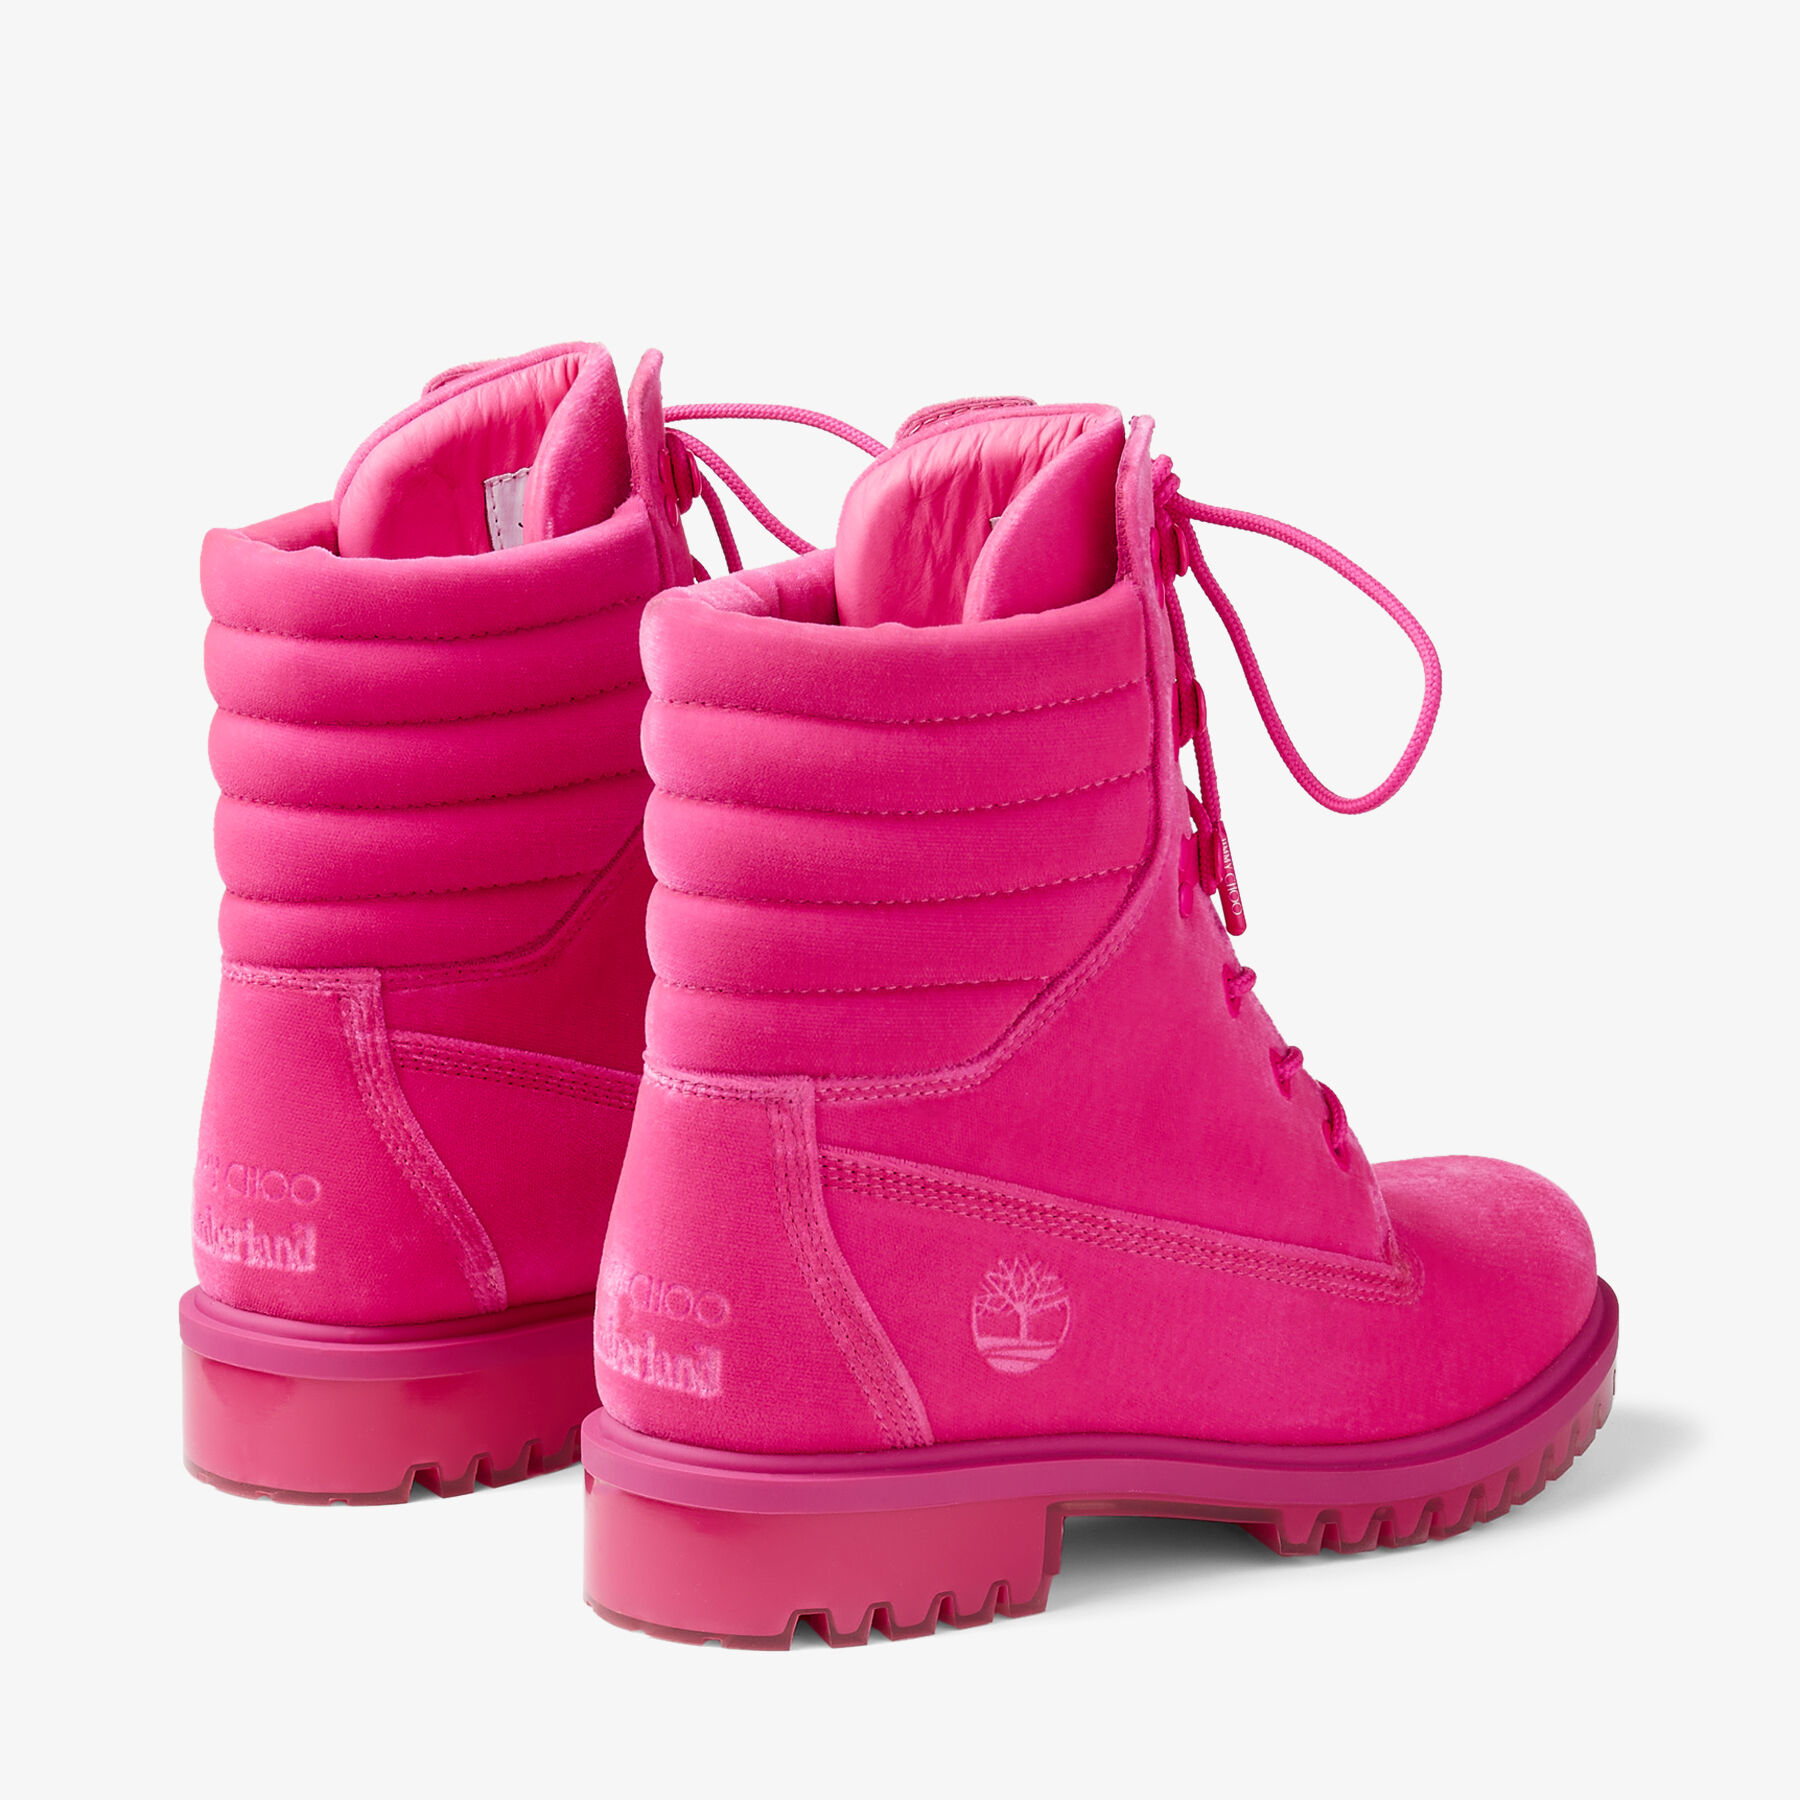 Hot Pink Timberland Velvet Ankle | JIMMY CHOO X TIMBERLAND 8 INCH PUFFER BOOT | Jimmy Choo x Timberland Collection JIMMY CHOO